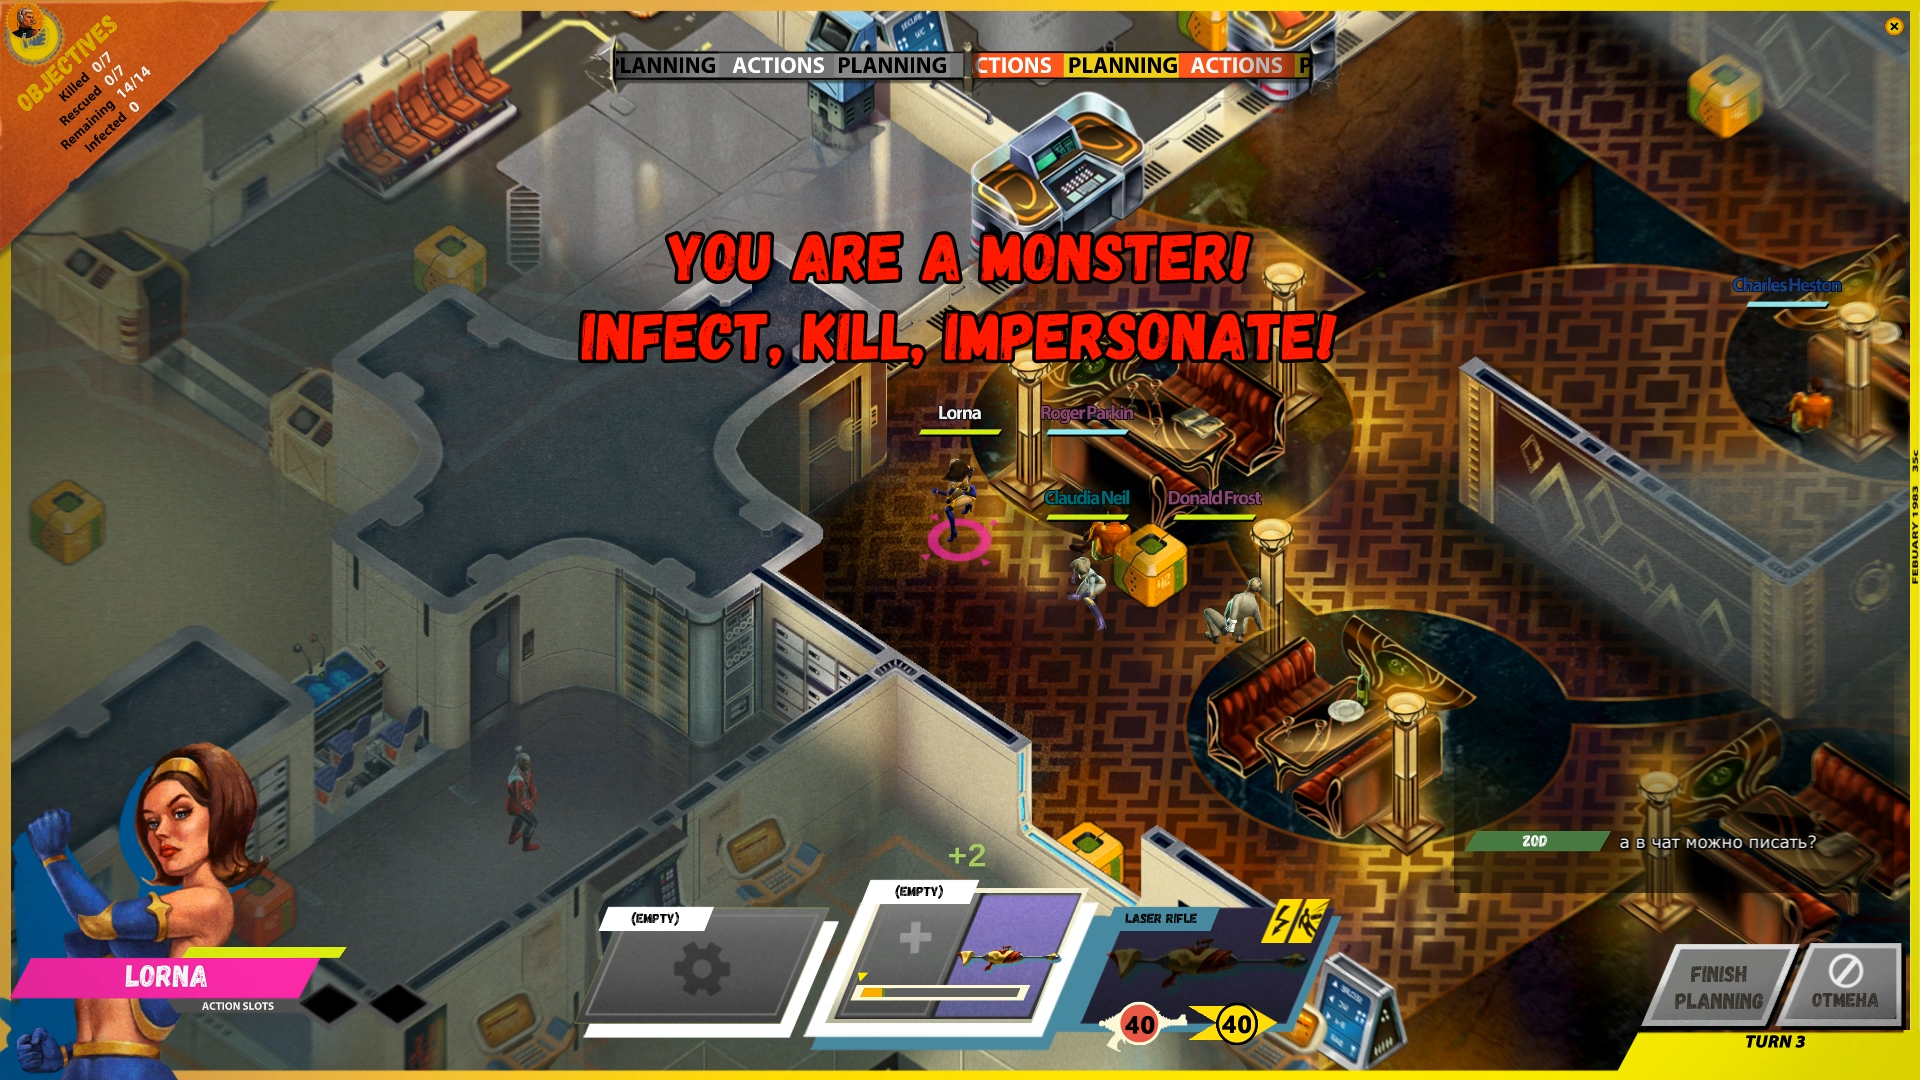 download free i am not a monster first contact review